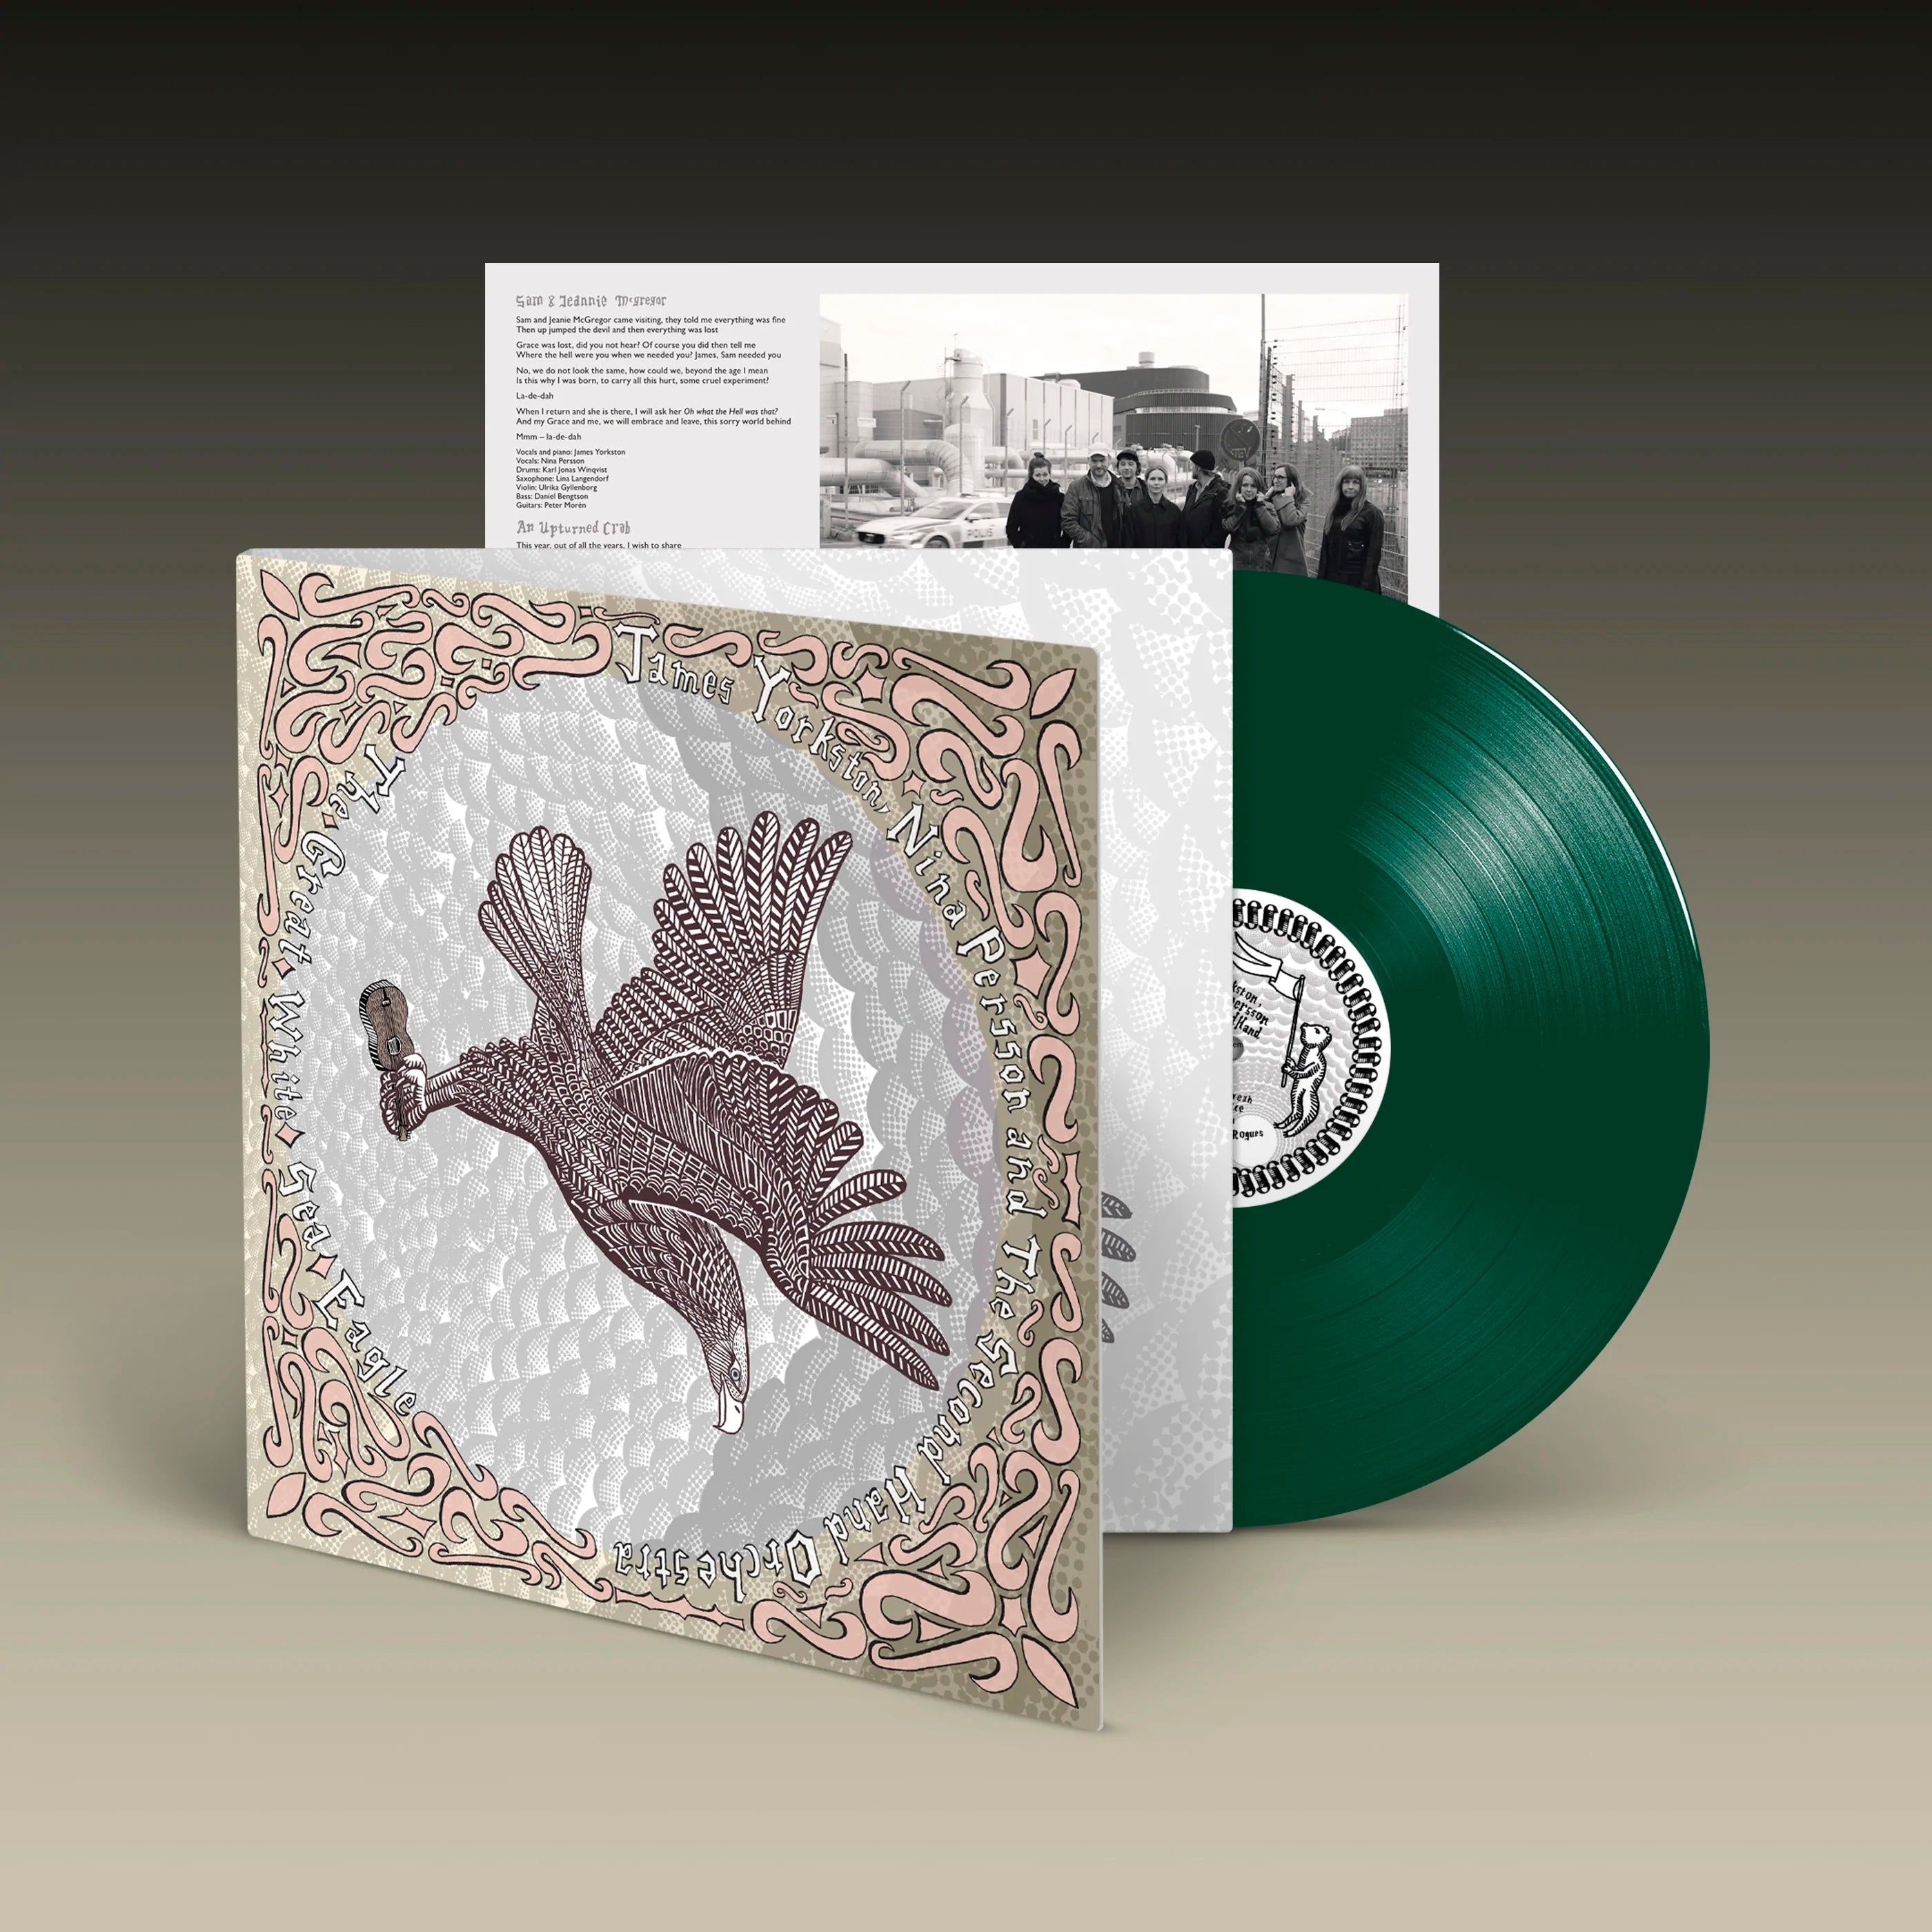 James Yorkston Nina Persson The Second Hand Orchestra The Great White Sea Eagle Green Vinyl LP